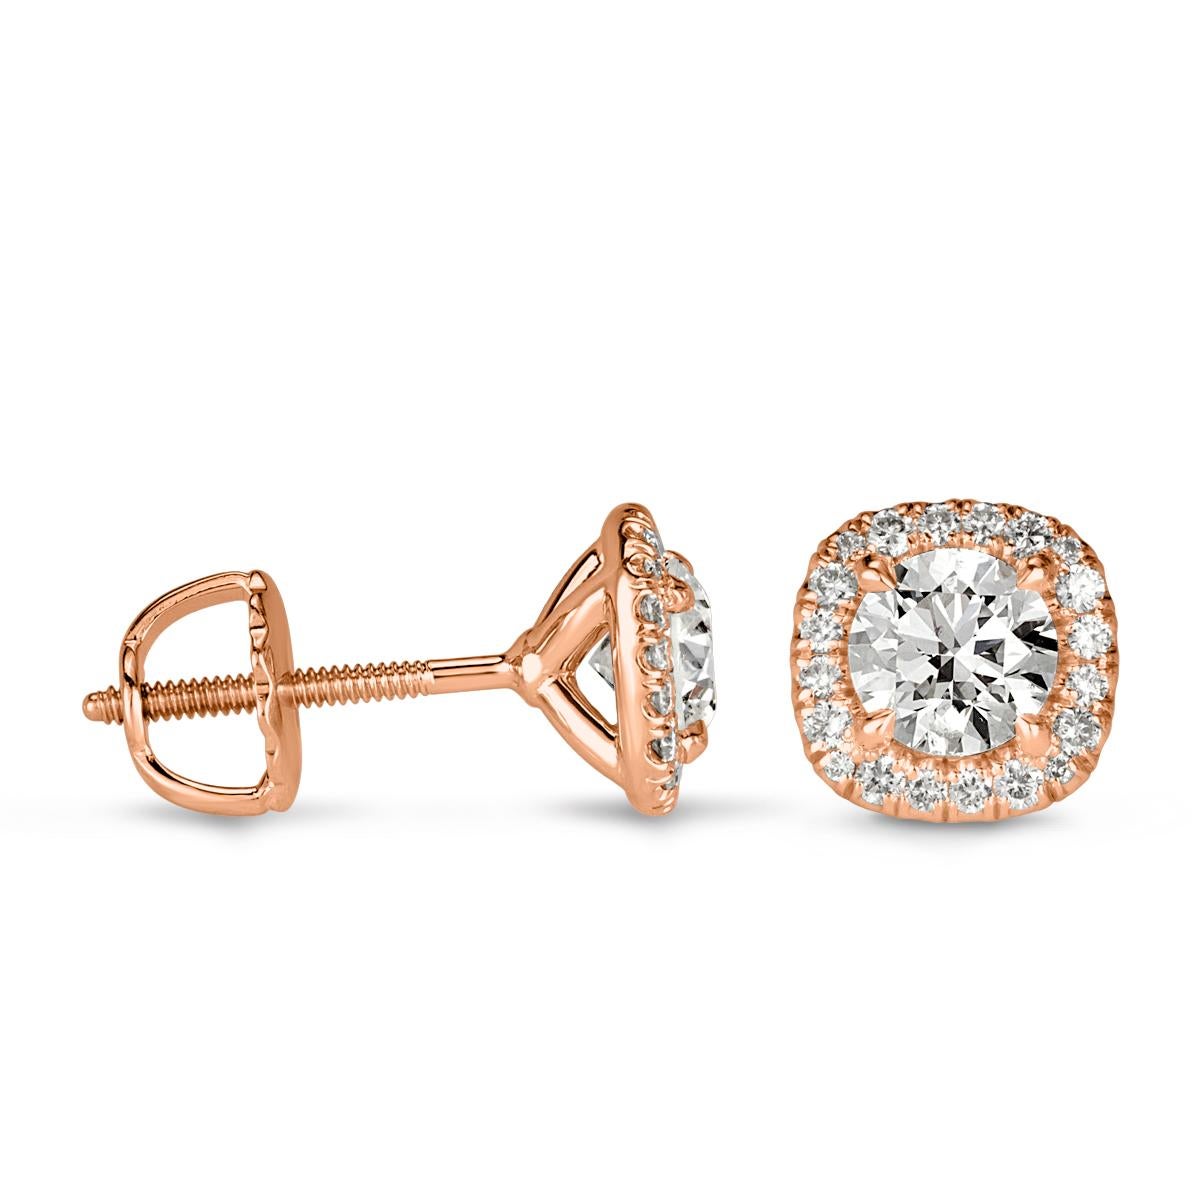 Custom created in 18k rose gold, this ravishing pair of diamond stud earrings showcases two round brilliant cut diamonds each surrounded by a cushion shaped halo of smaller round brilliant cut diamonds. The diamonds total 1.00ct in weight and are